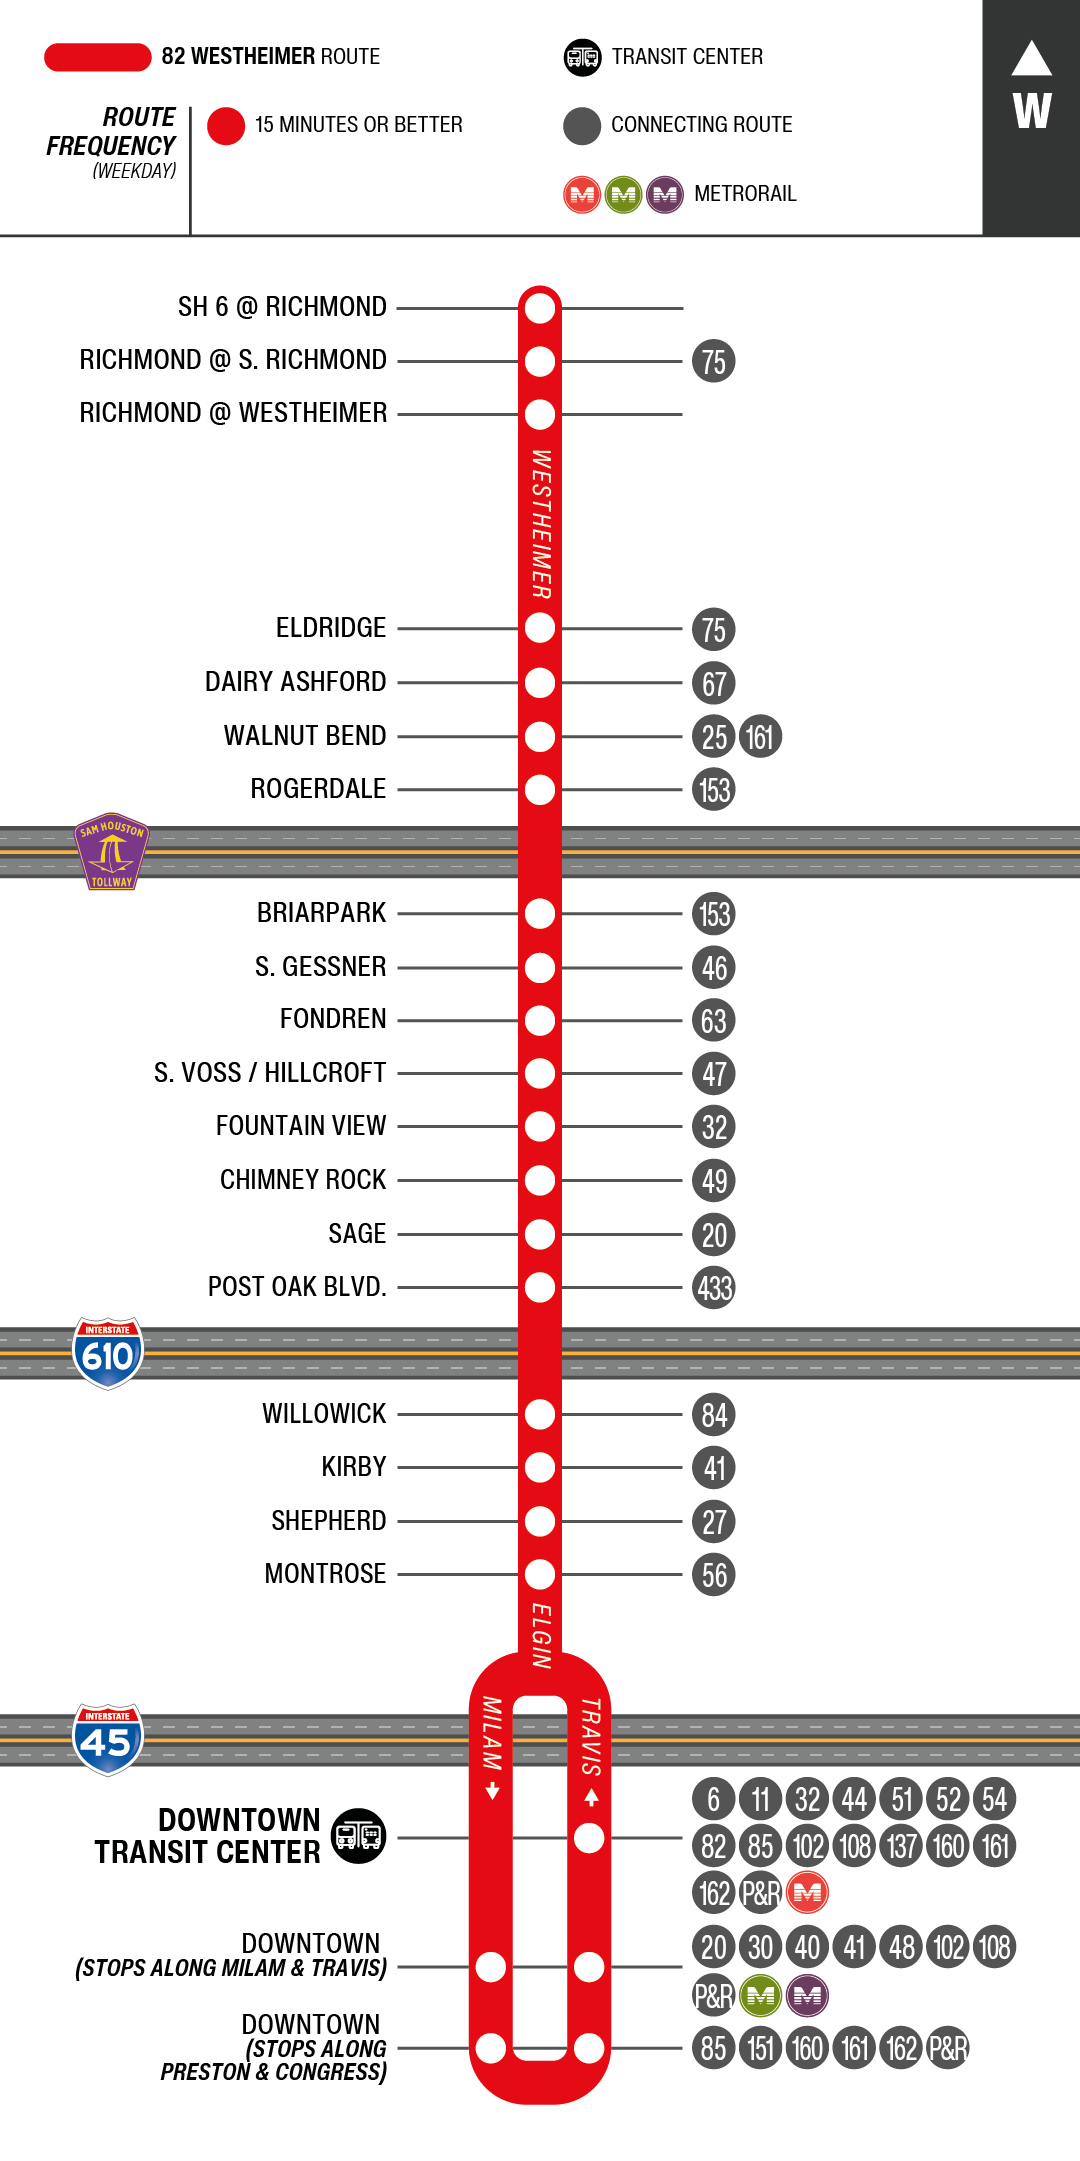 Route map for 82 Westheimer bus